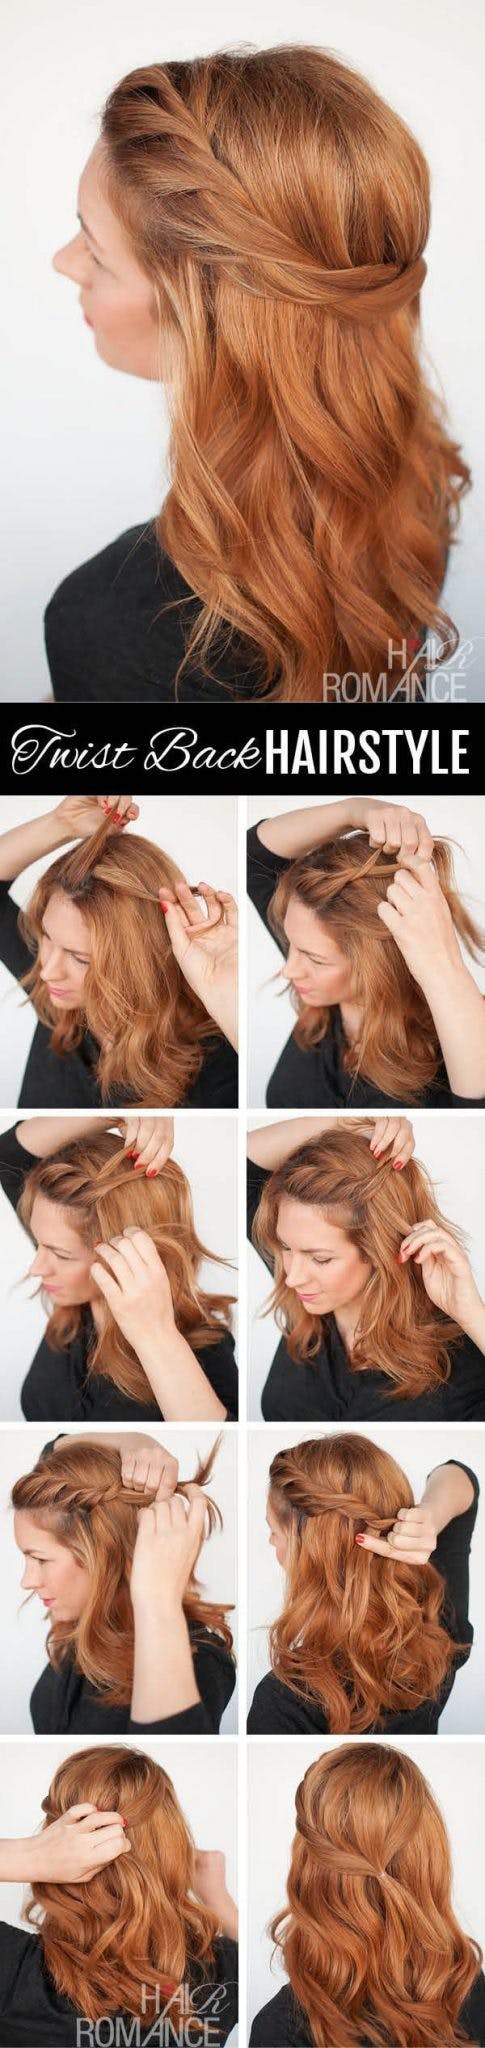 30 Quick And Easy Hair Tutorials For Every Hair Length